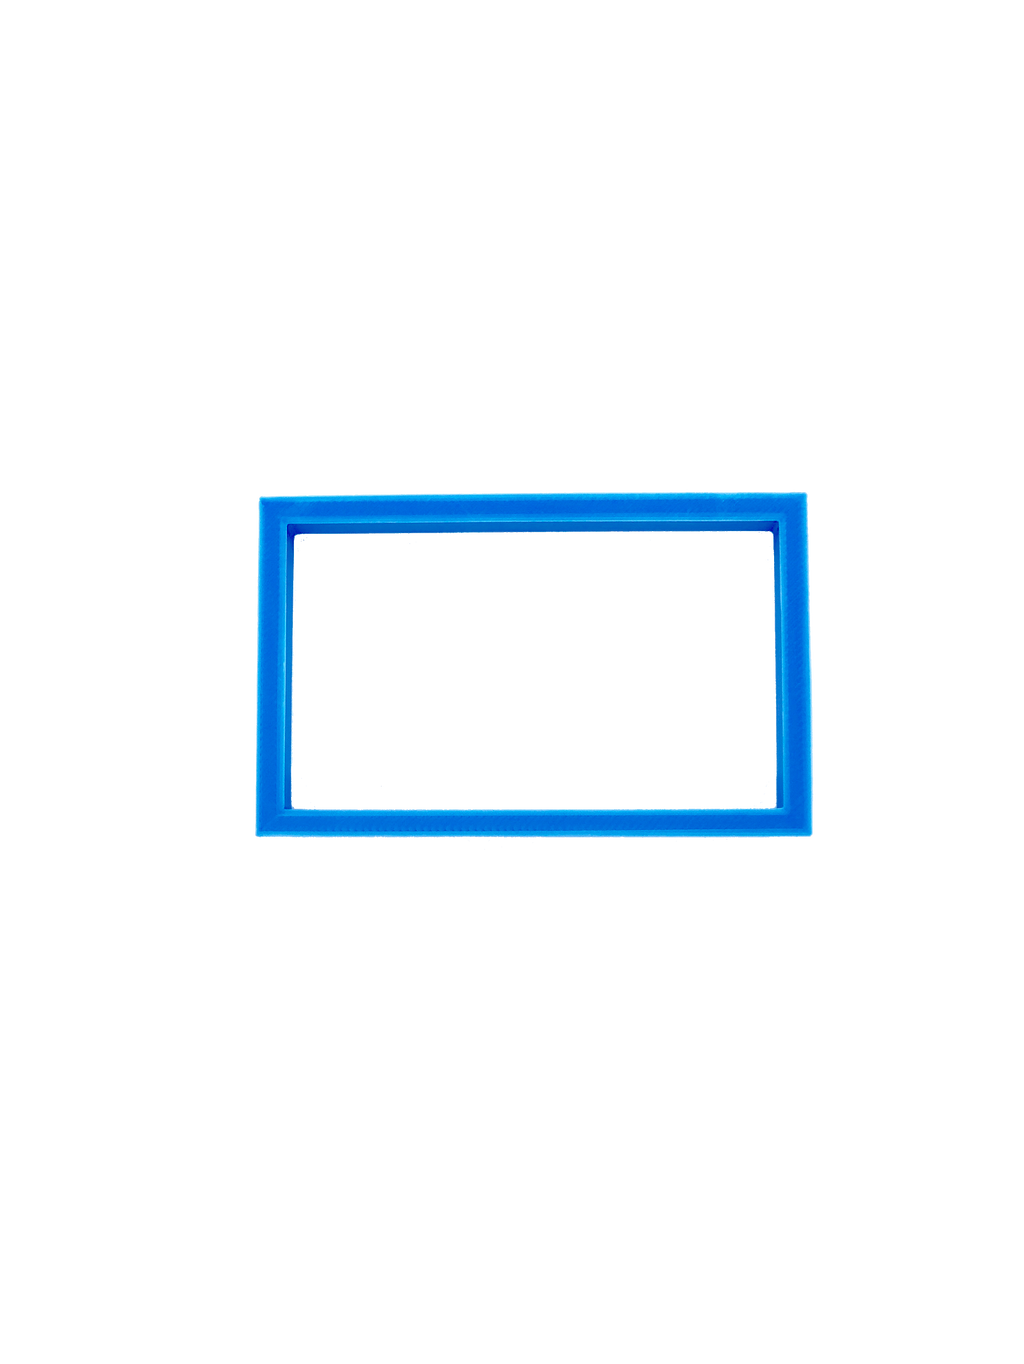 Rectangle Cookie Cutter